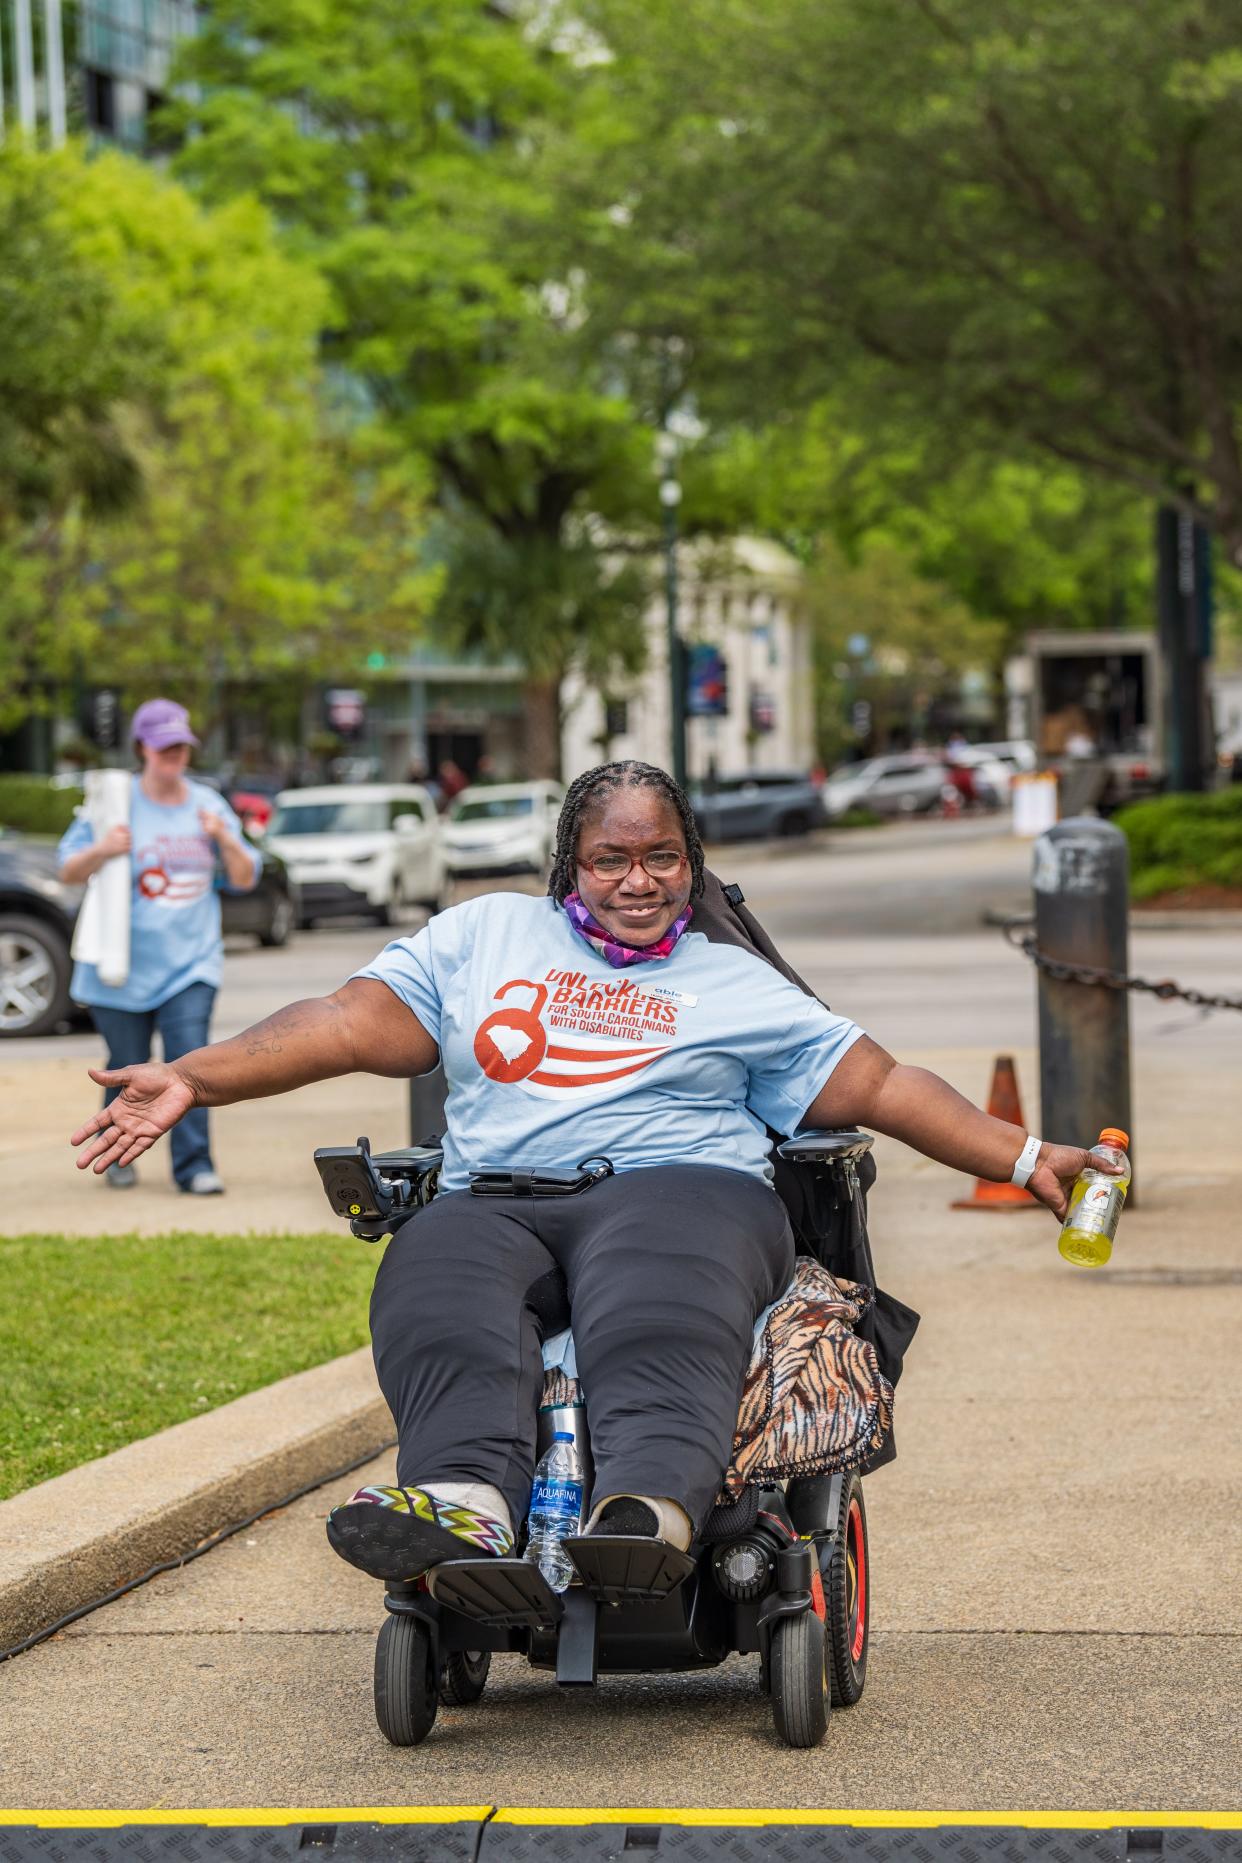 Hope Jenkins, who works at Able SC, a nonprofit group that provides independent living services to people with disabilities, attended a rally April 13, 2022, at the state capitol in South Carolina. (Photo credit: Crush Rush Photography)